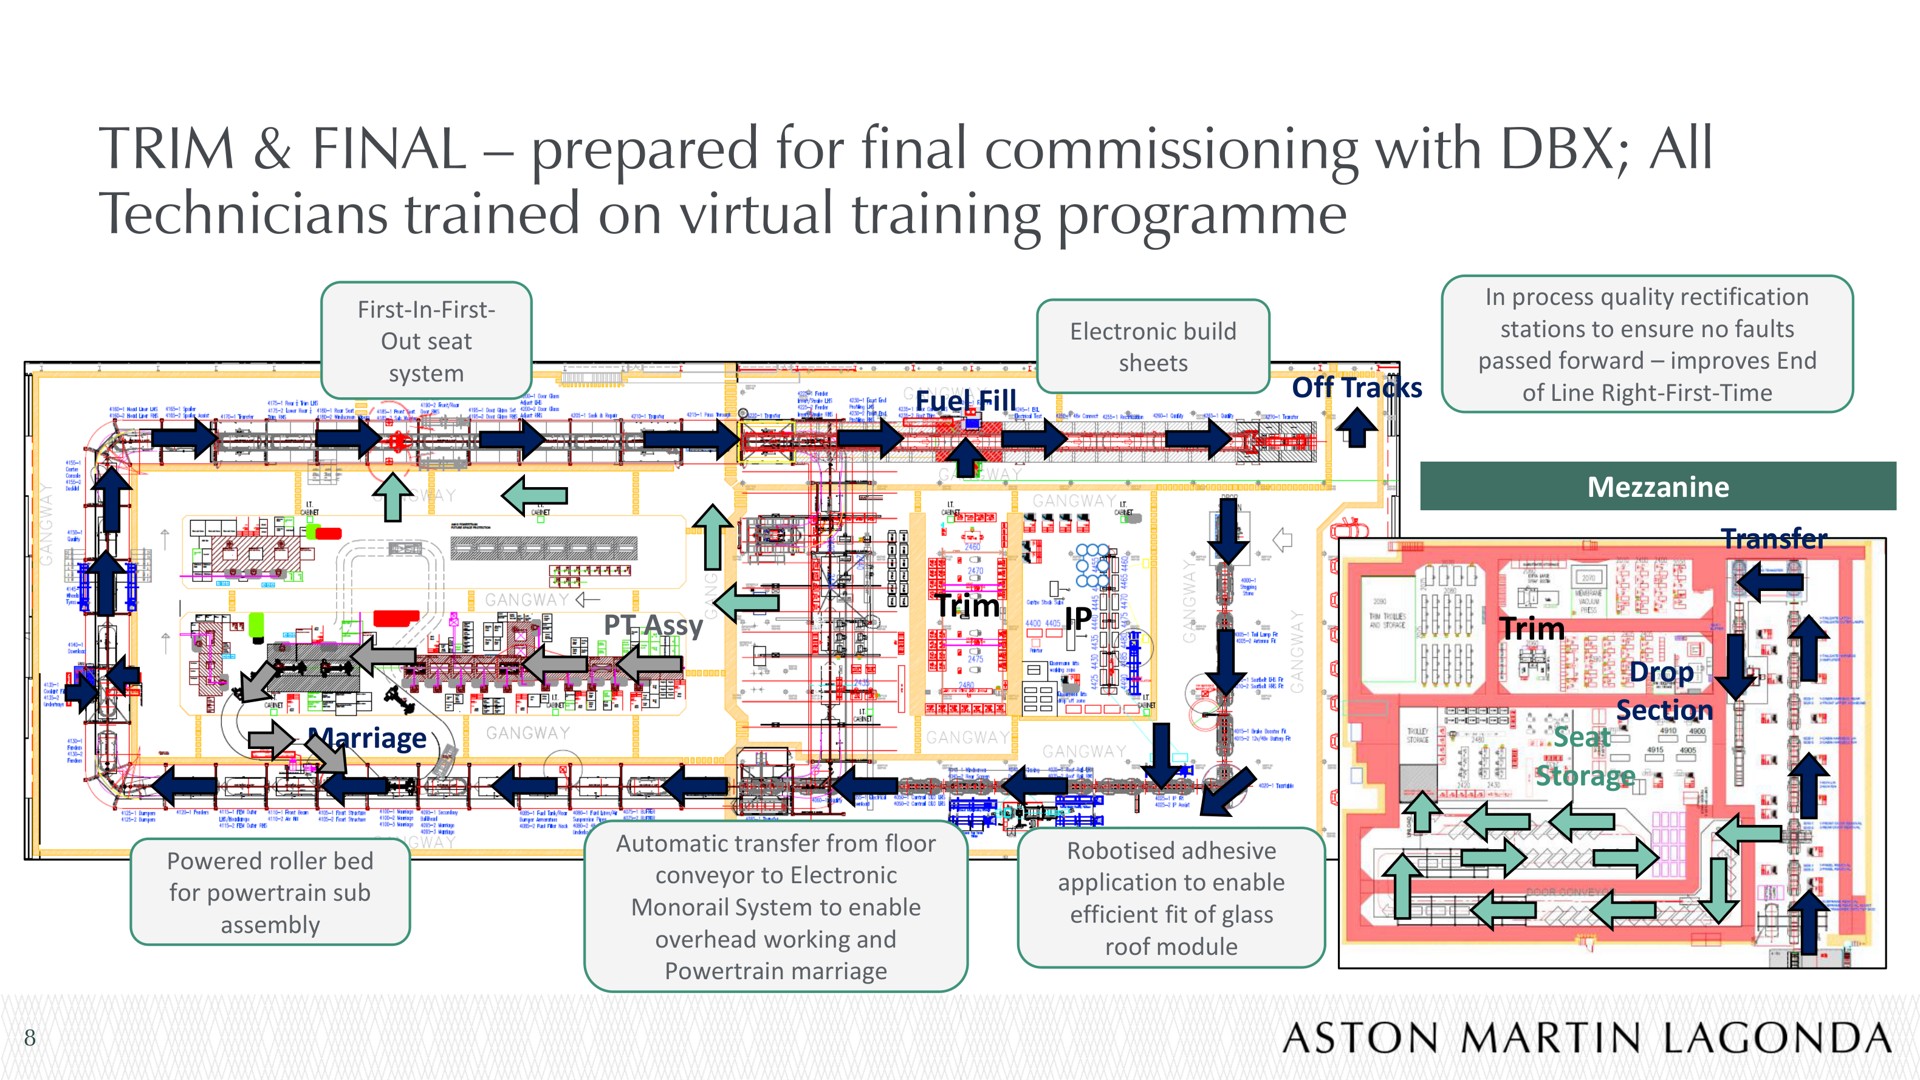 trim final prepared for final commissioning with all technicians trained on virtual training | Aston Martin Lagonda